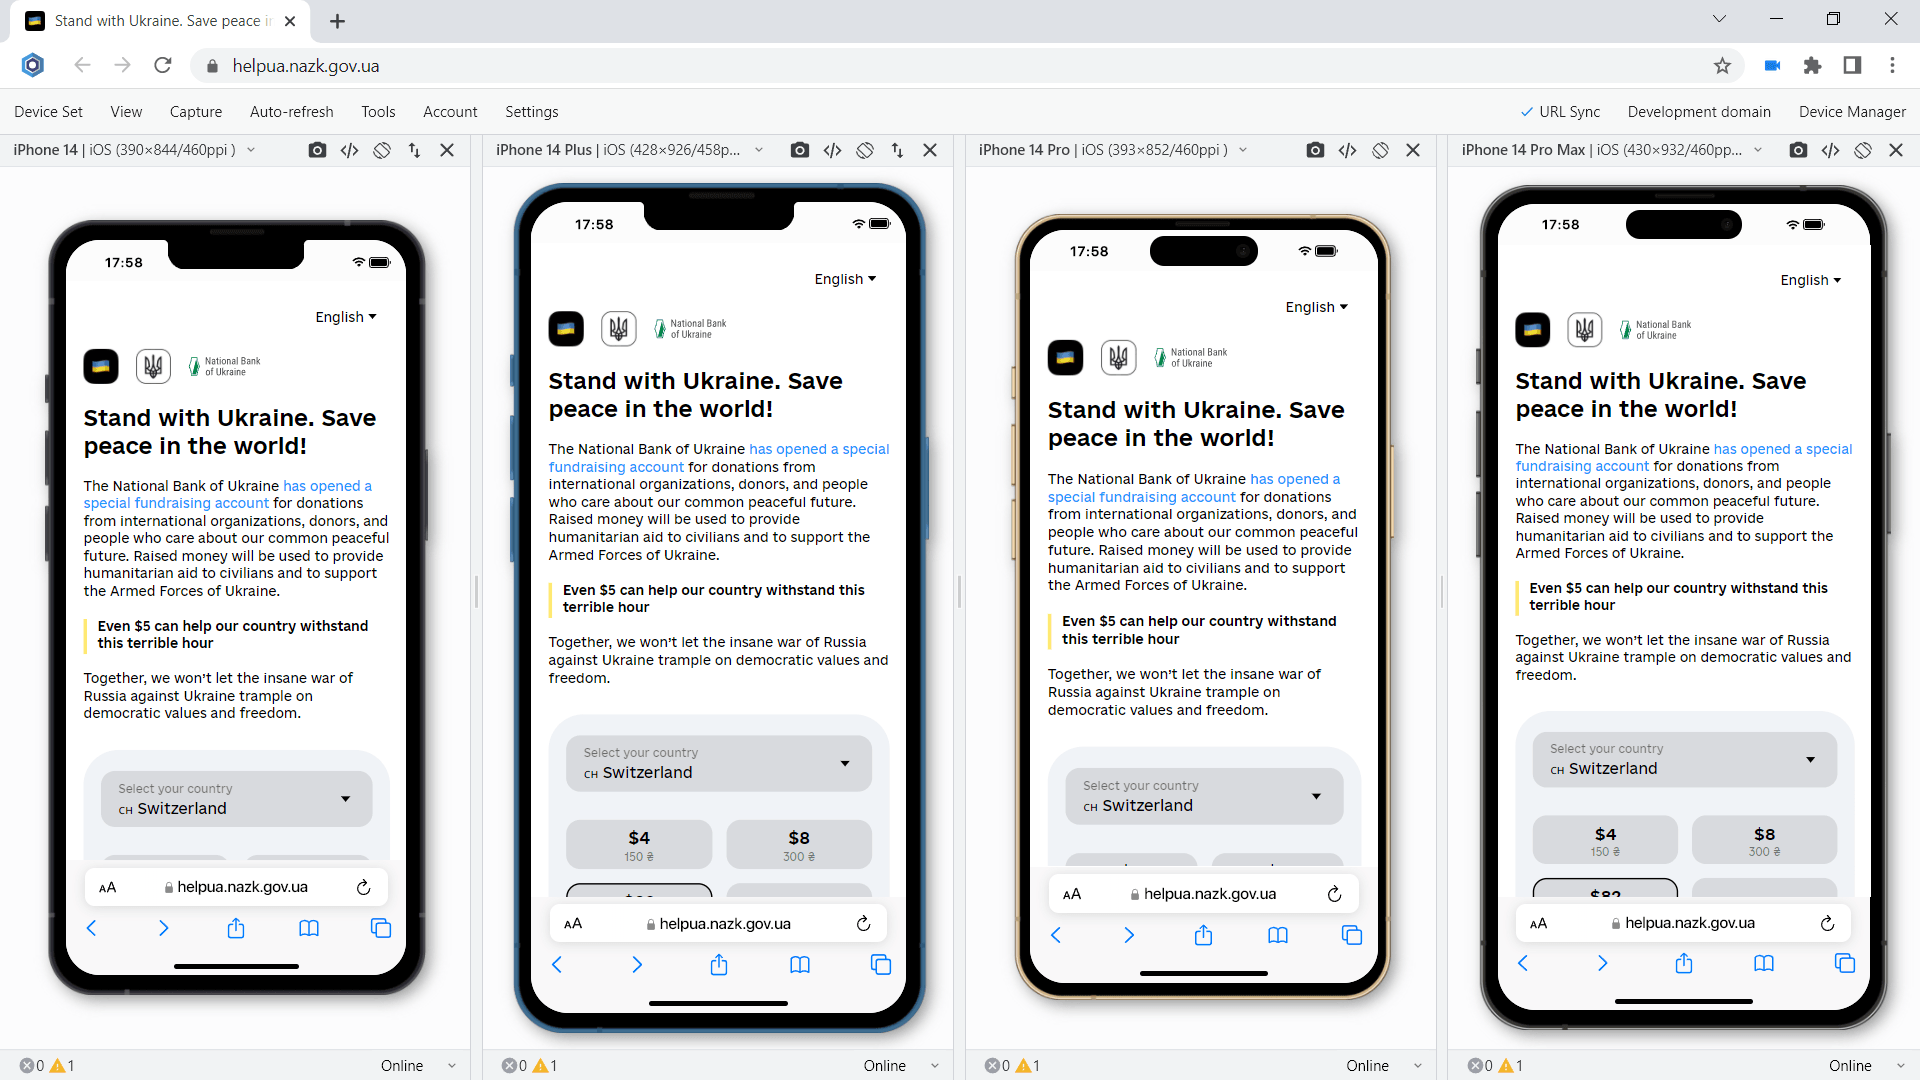 Multi-device test on iPhone 14-series